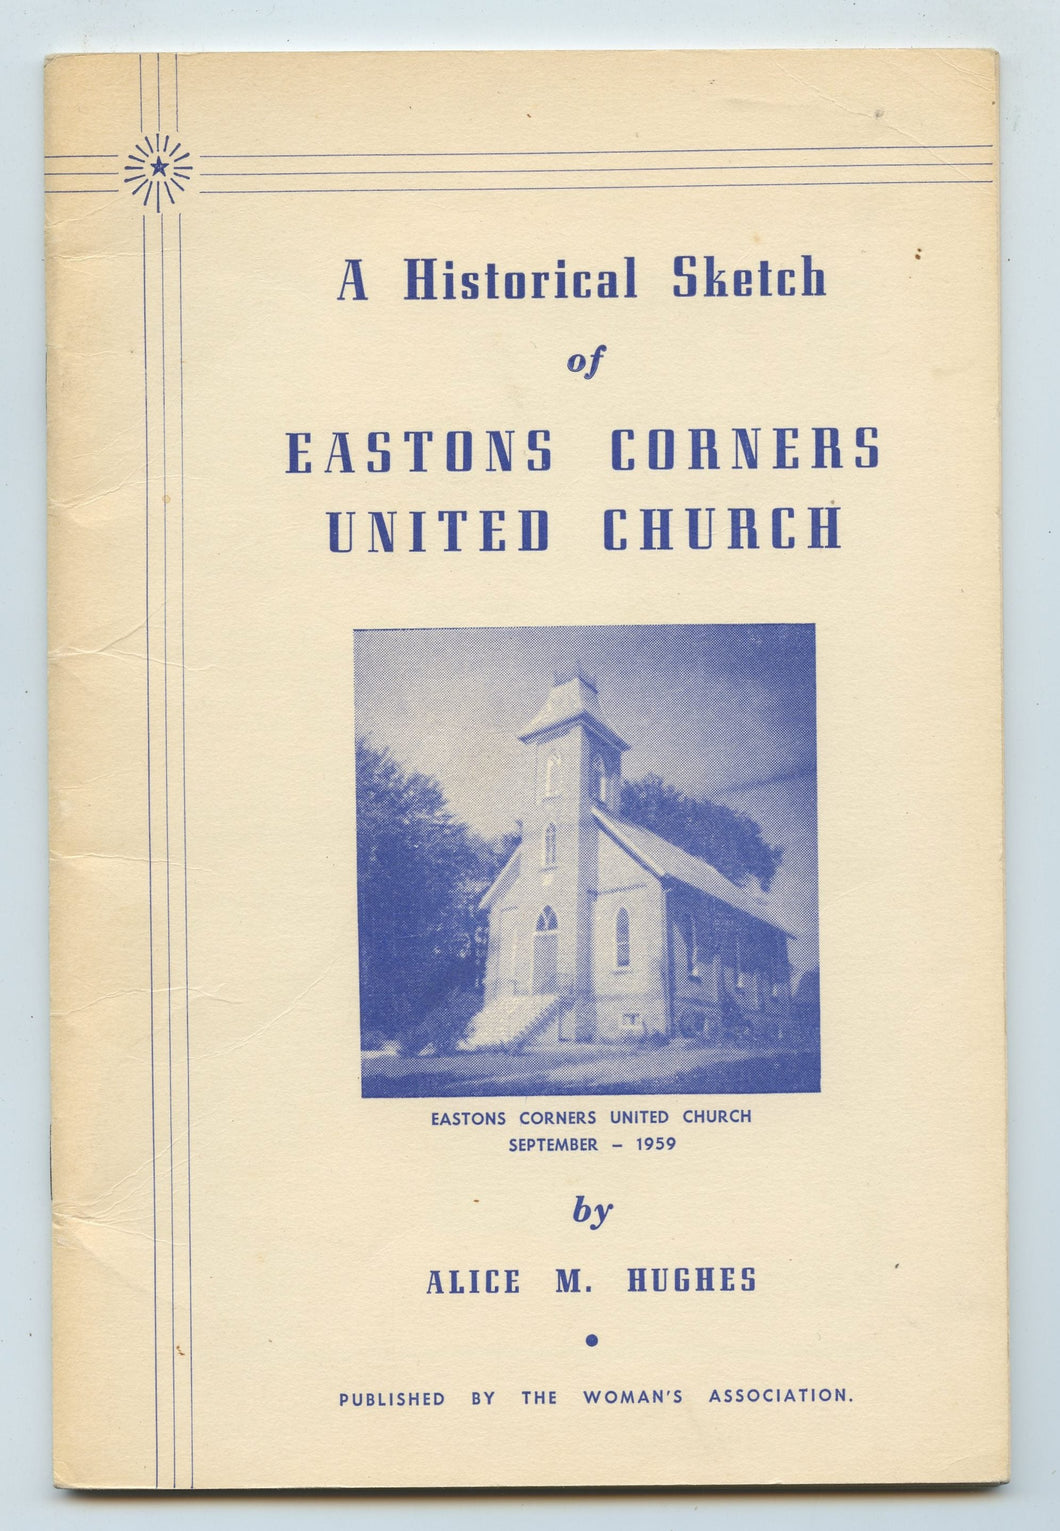 A Historical Sketch of Eastons Corners United Church